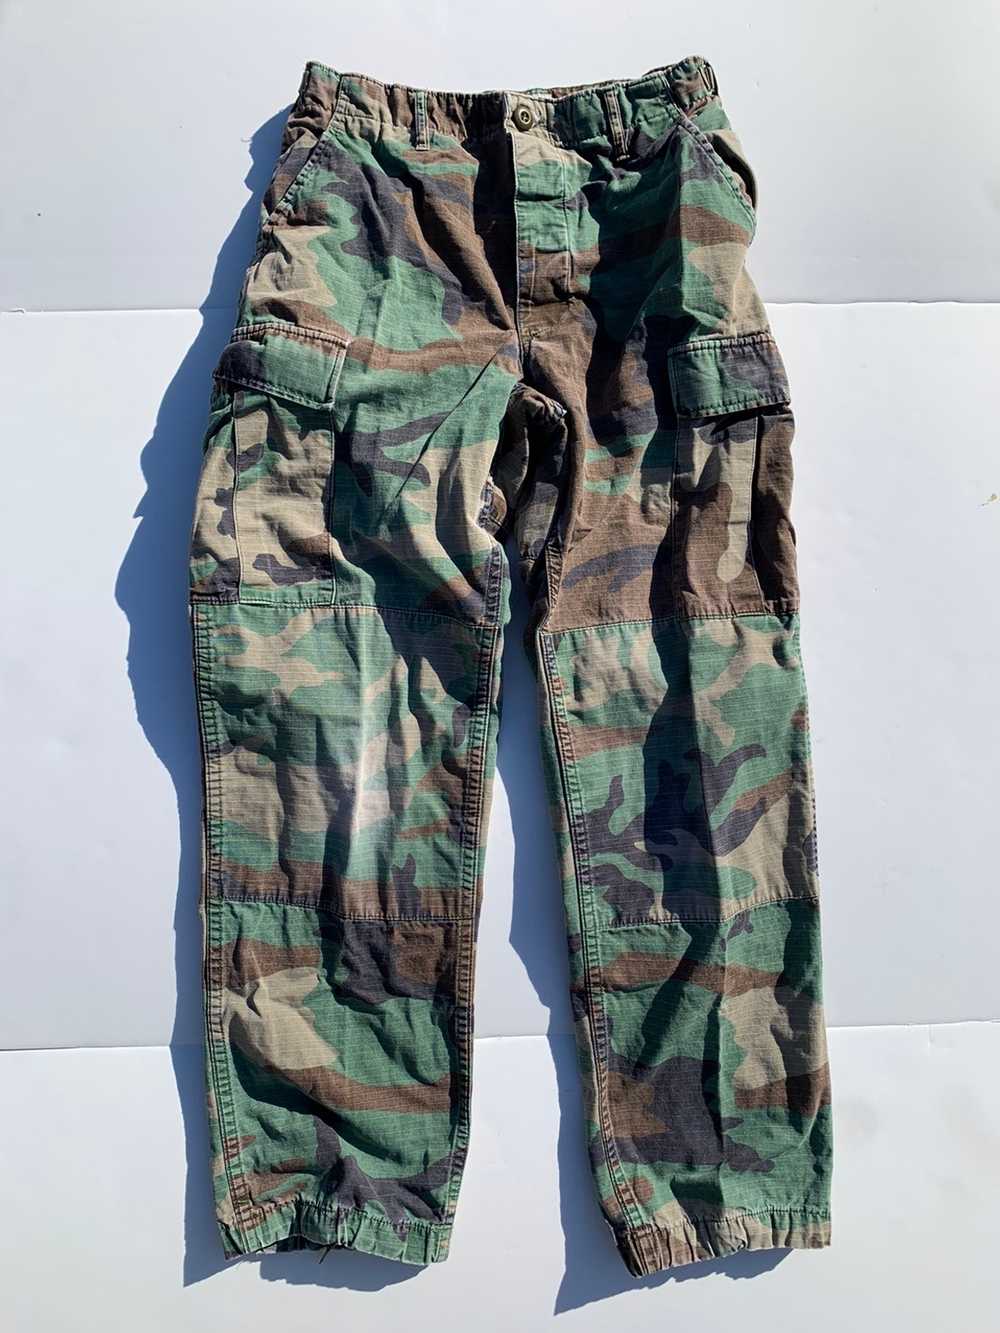 Camouflage green cargos for men